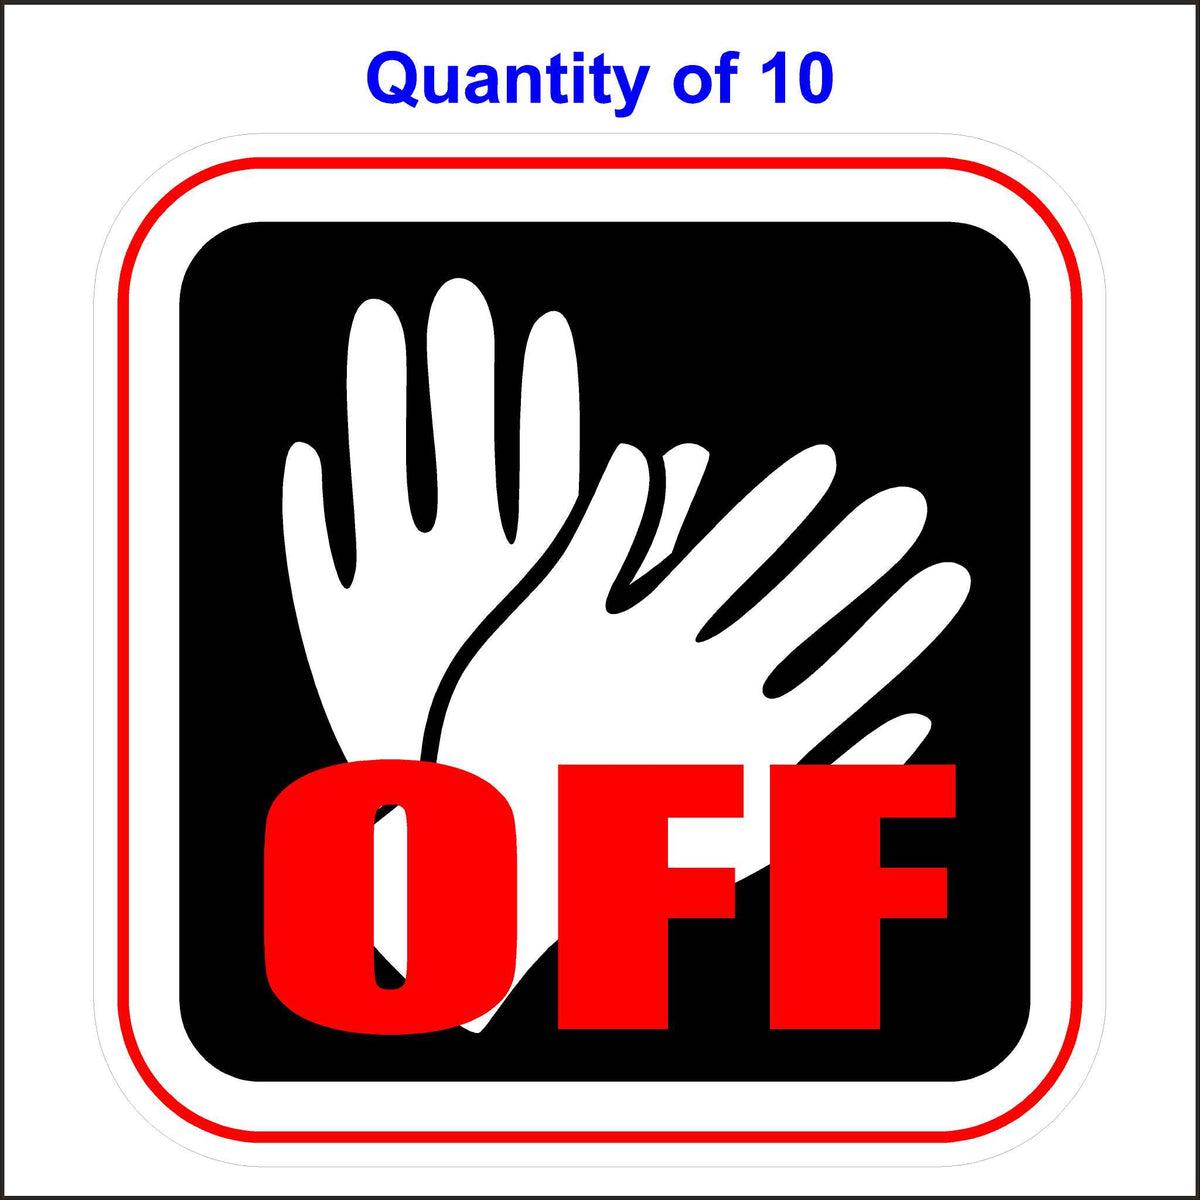 Hands off Sticker. This Sticker Has a Black Background With White Hands and the Word off Printed in Red. 10 Quantity.